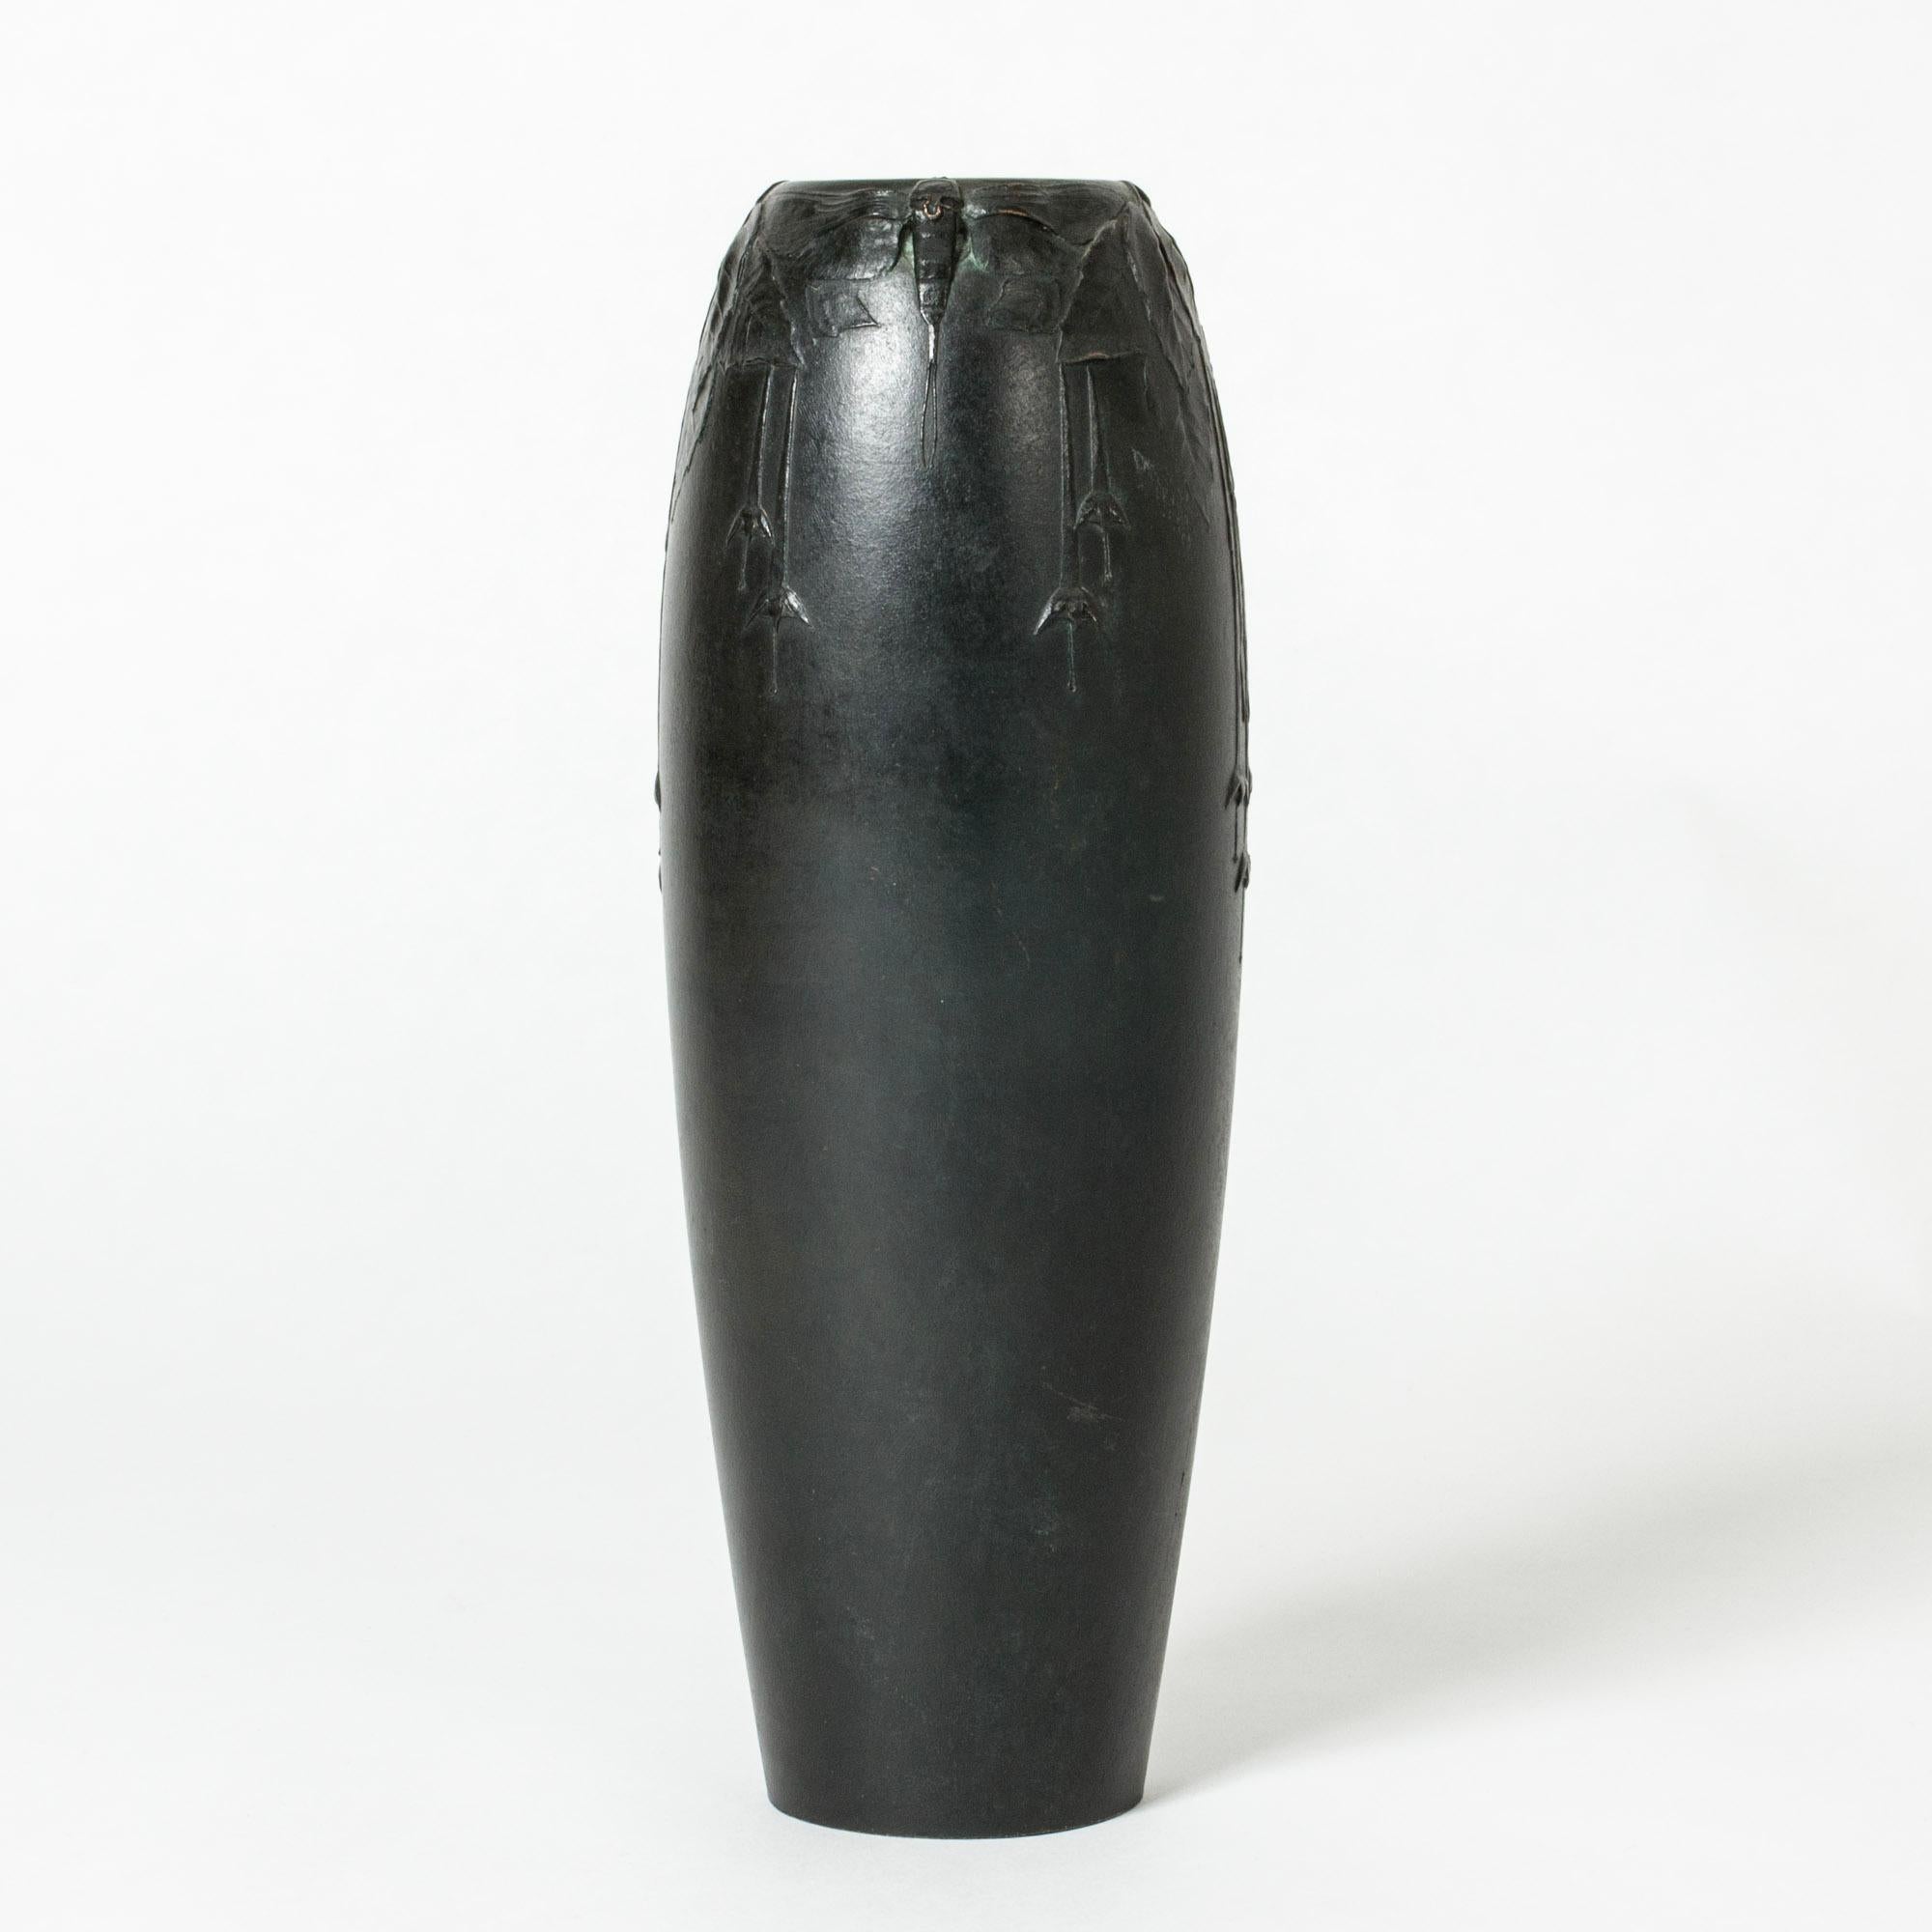 Beautiful Art Noveau vase in black patinated bronze, designed by Hugo Elmqvist. Elegant clean form with relief decor of leaves, flowers and dragonflies around the mouth.